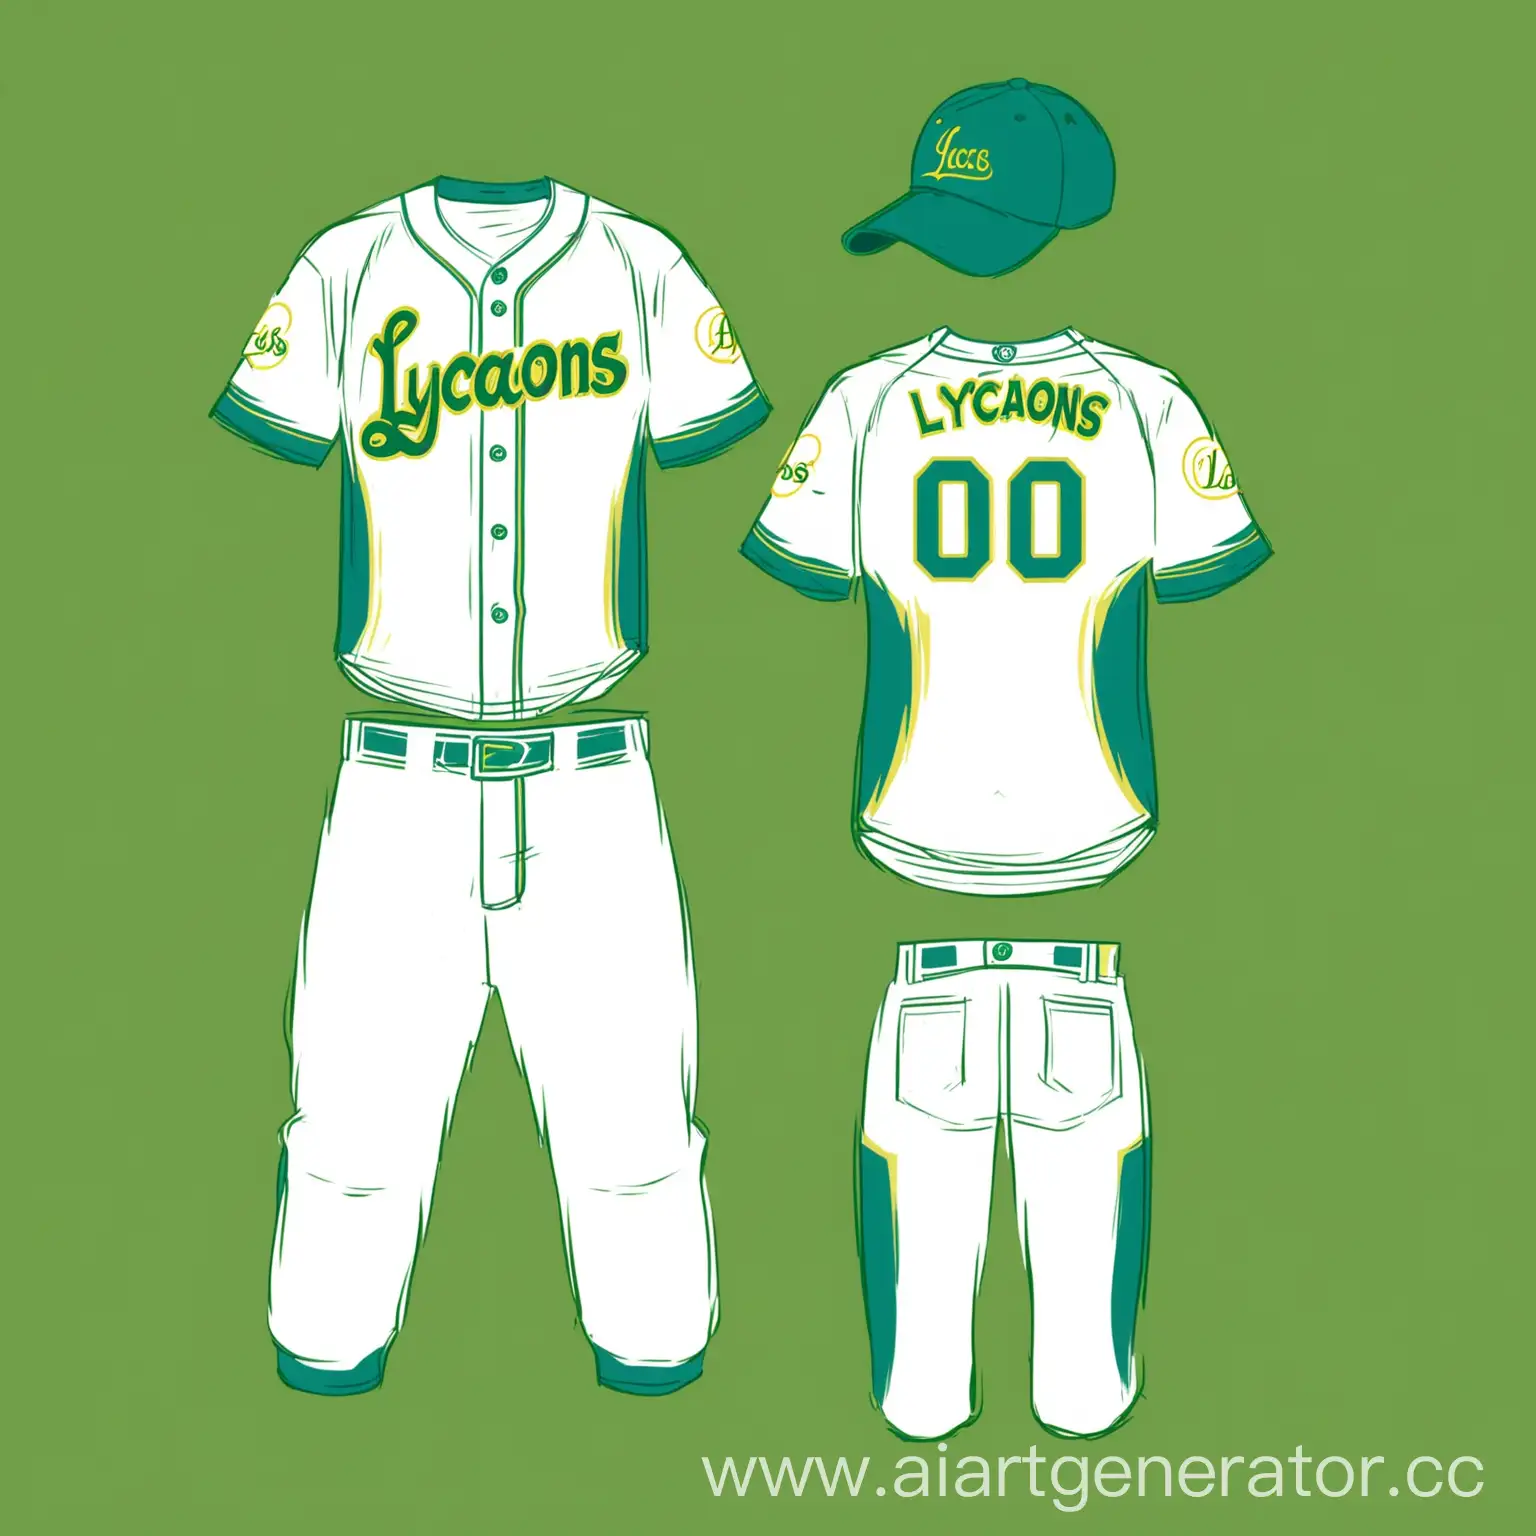 Lycaons-Baseball-Uniform-in-White-with-Yellow-Green-and-Blue-Accents